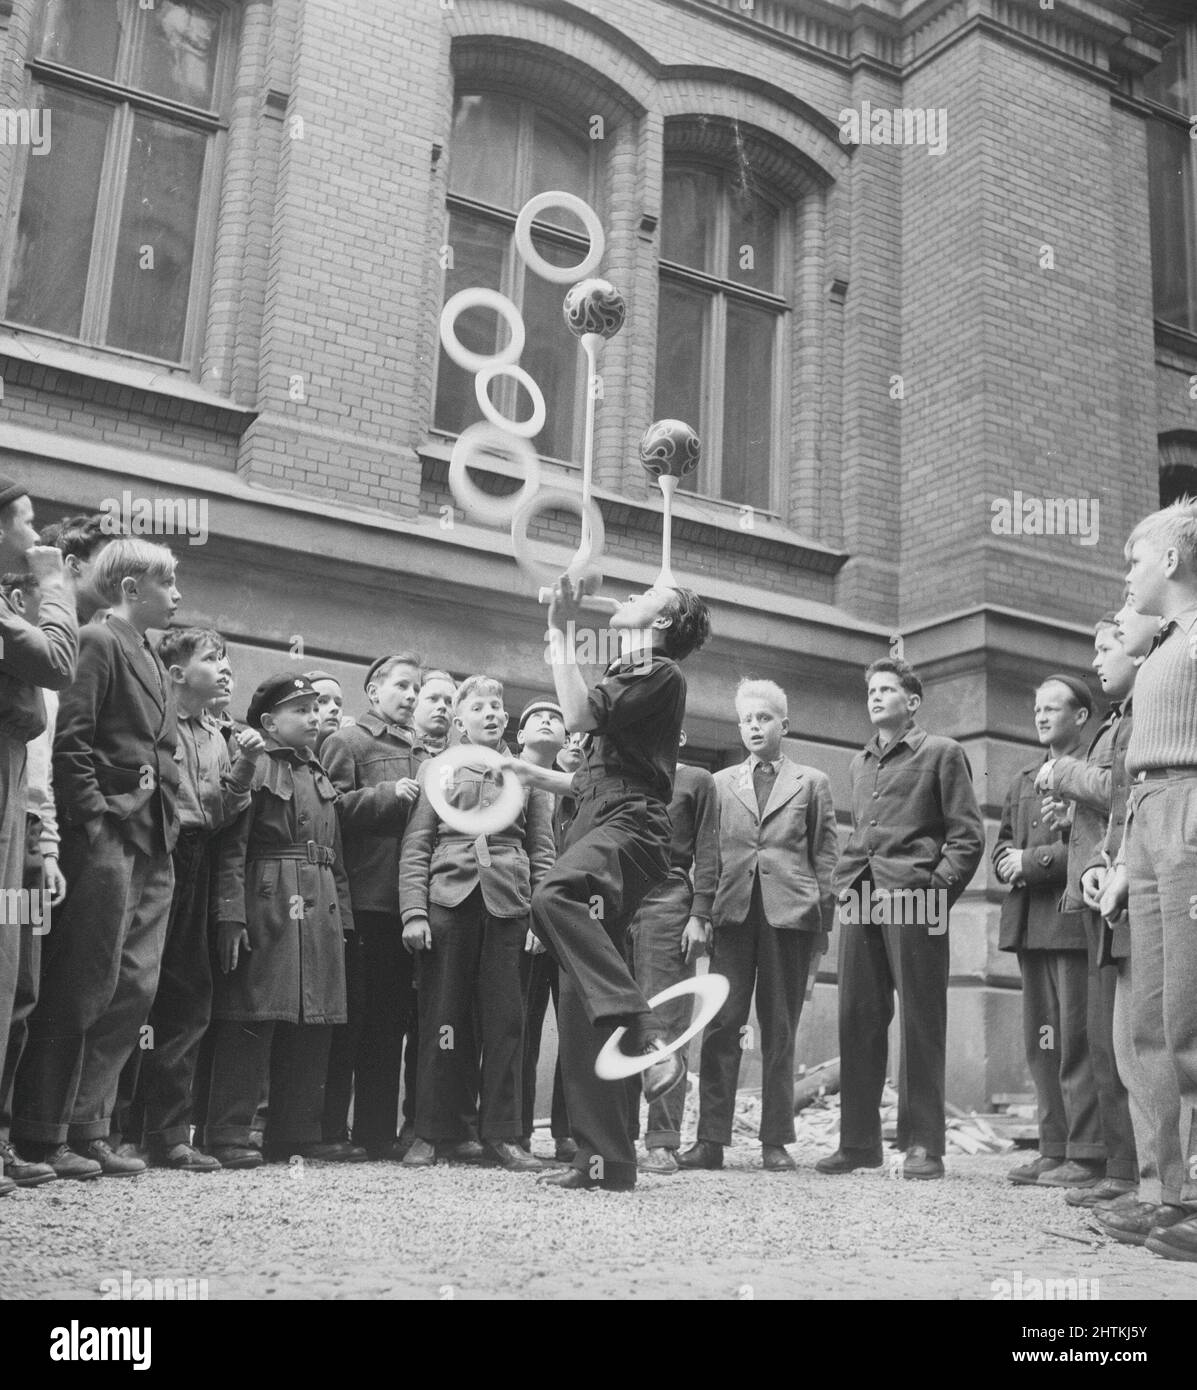 Talented man in the 1950s. The swedish nature filmdirector Jan Lindblad, 1932-1987, was also a talented juggler and acrobat and is seen here balancing juggling and balancing balls at the same time while standing on one leg only. Sweden 1955  Kristoffersson ref BU91-3 Stock Photo